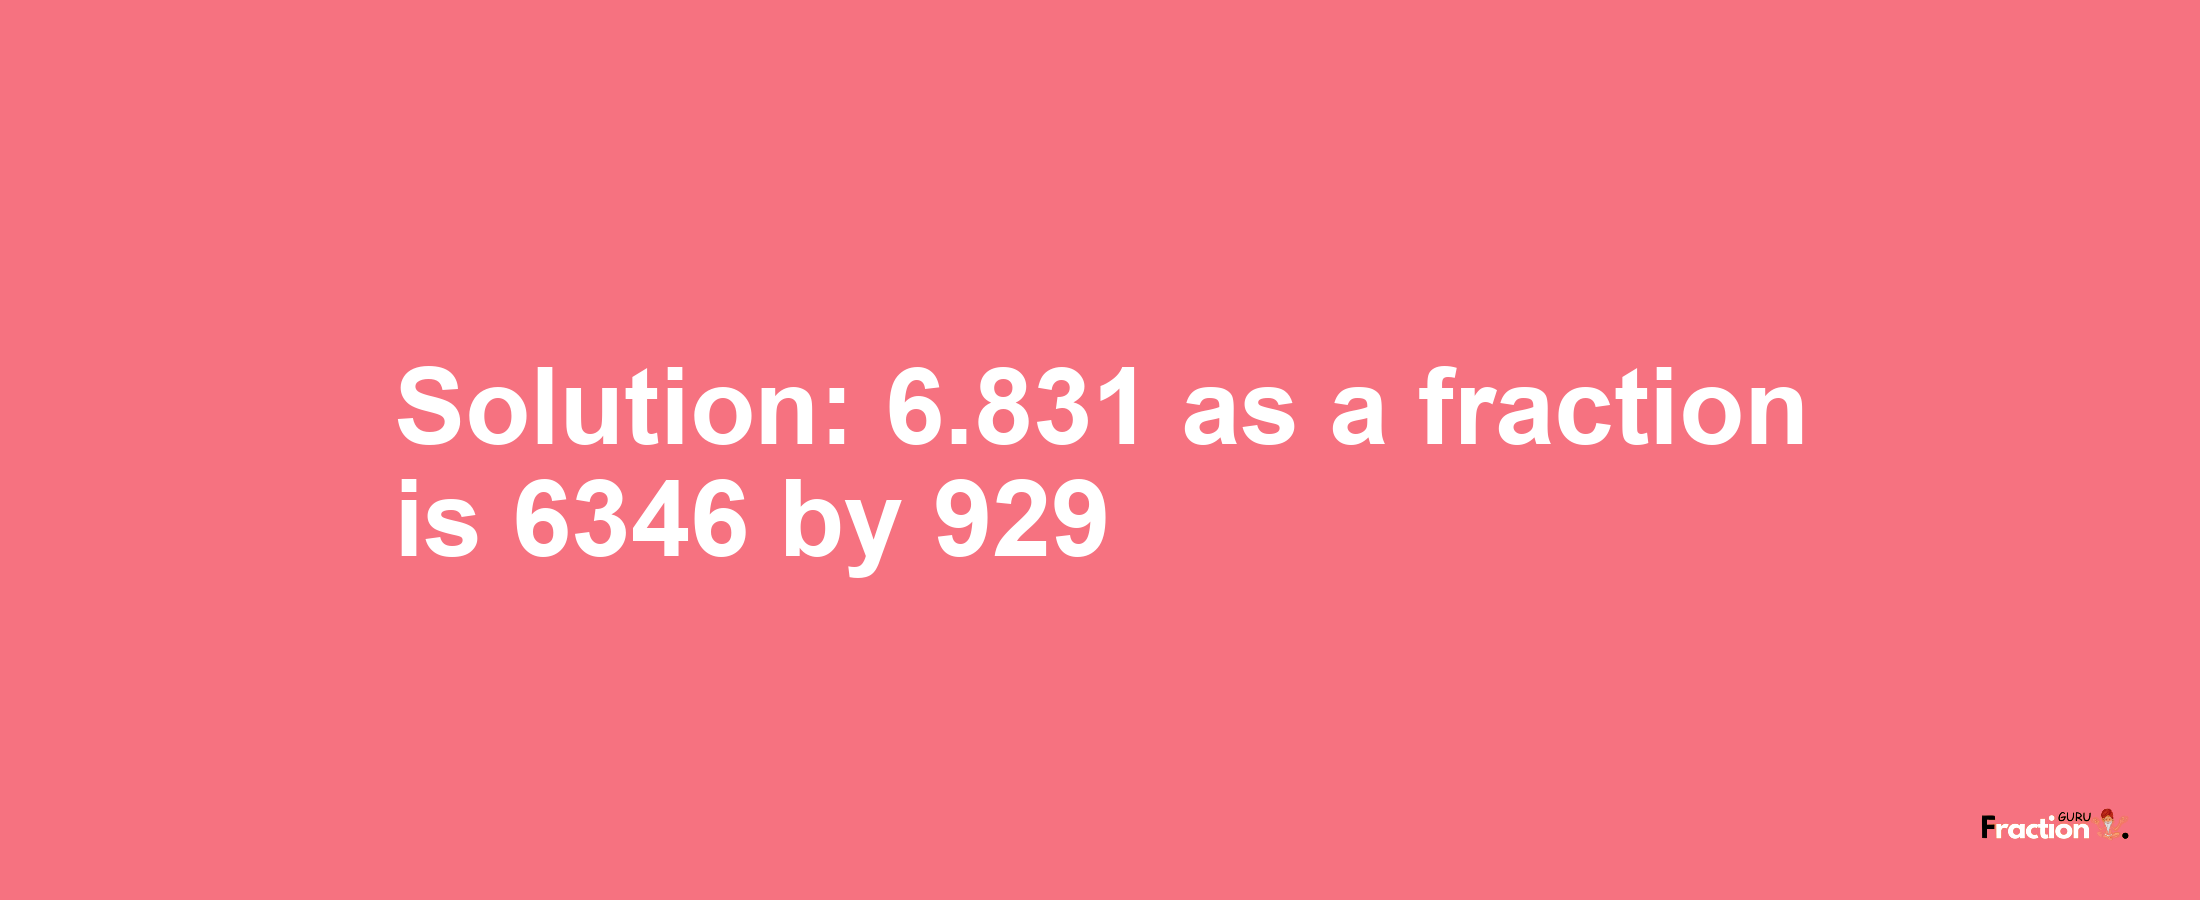 Solution:6.831 as a fraction is 6346/929